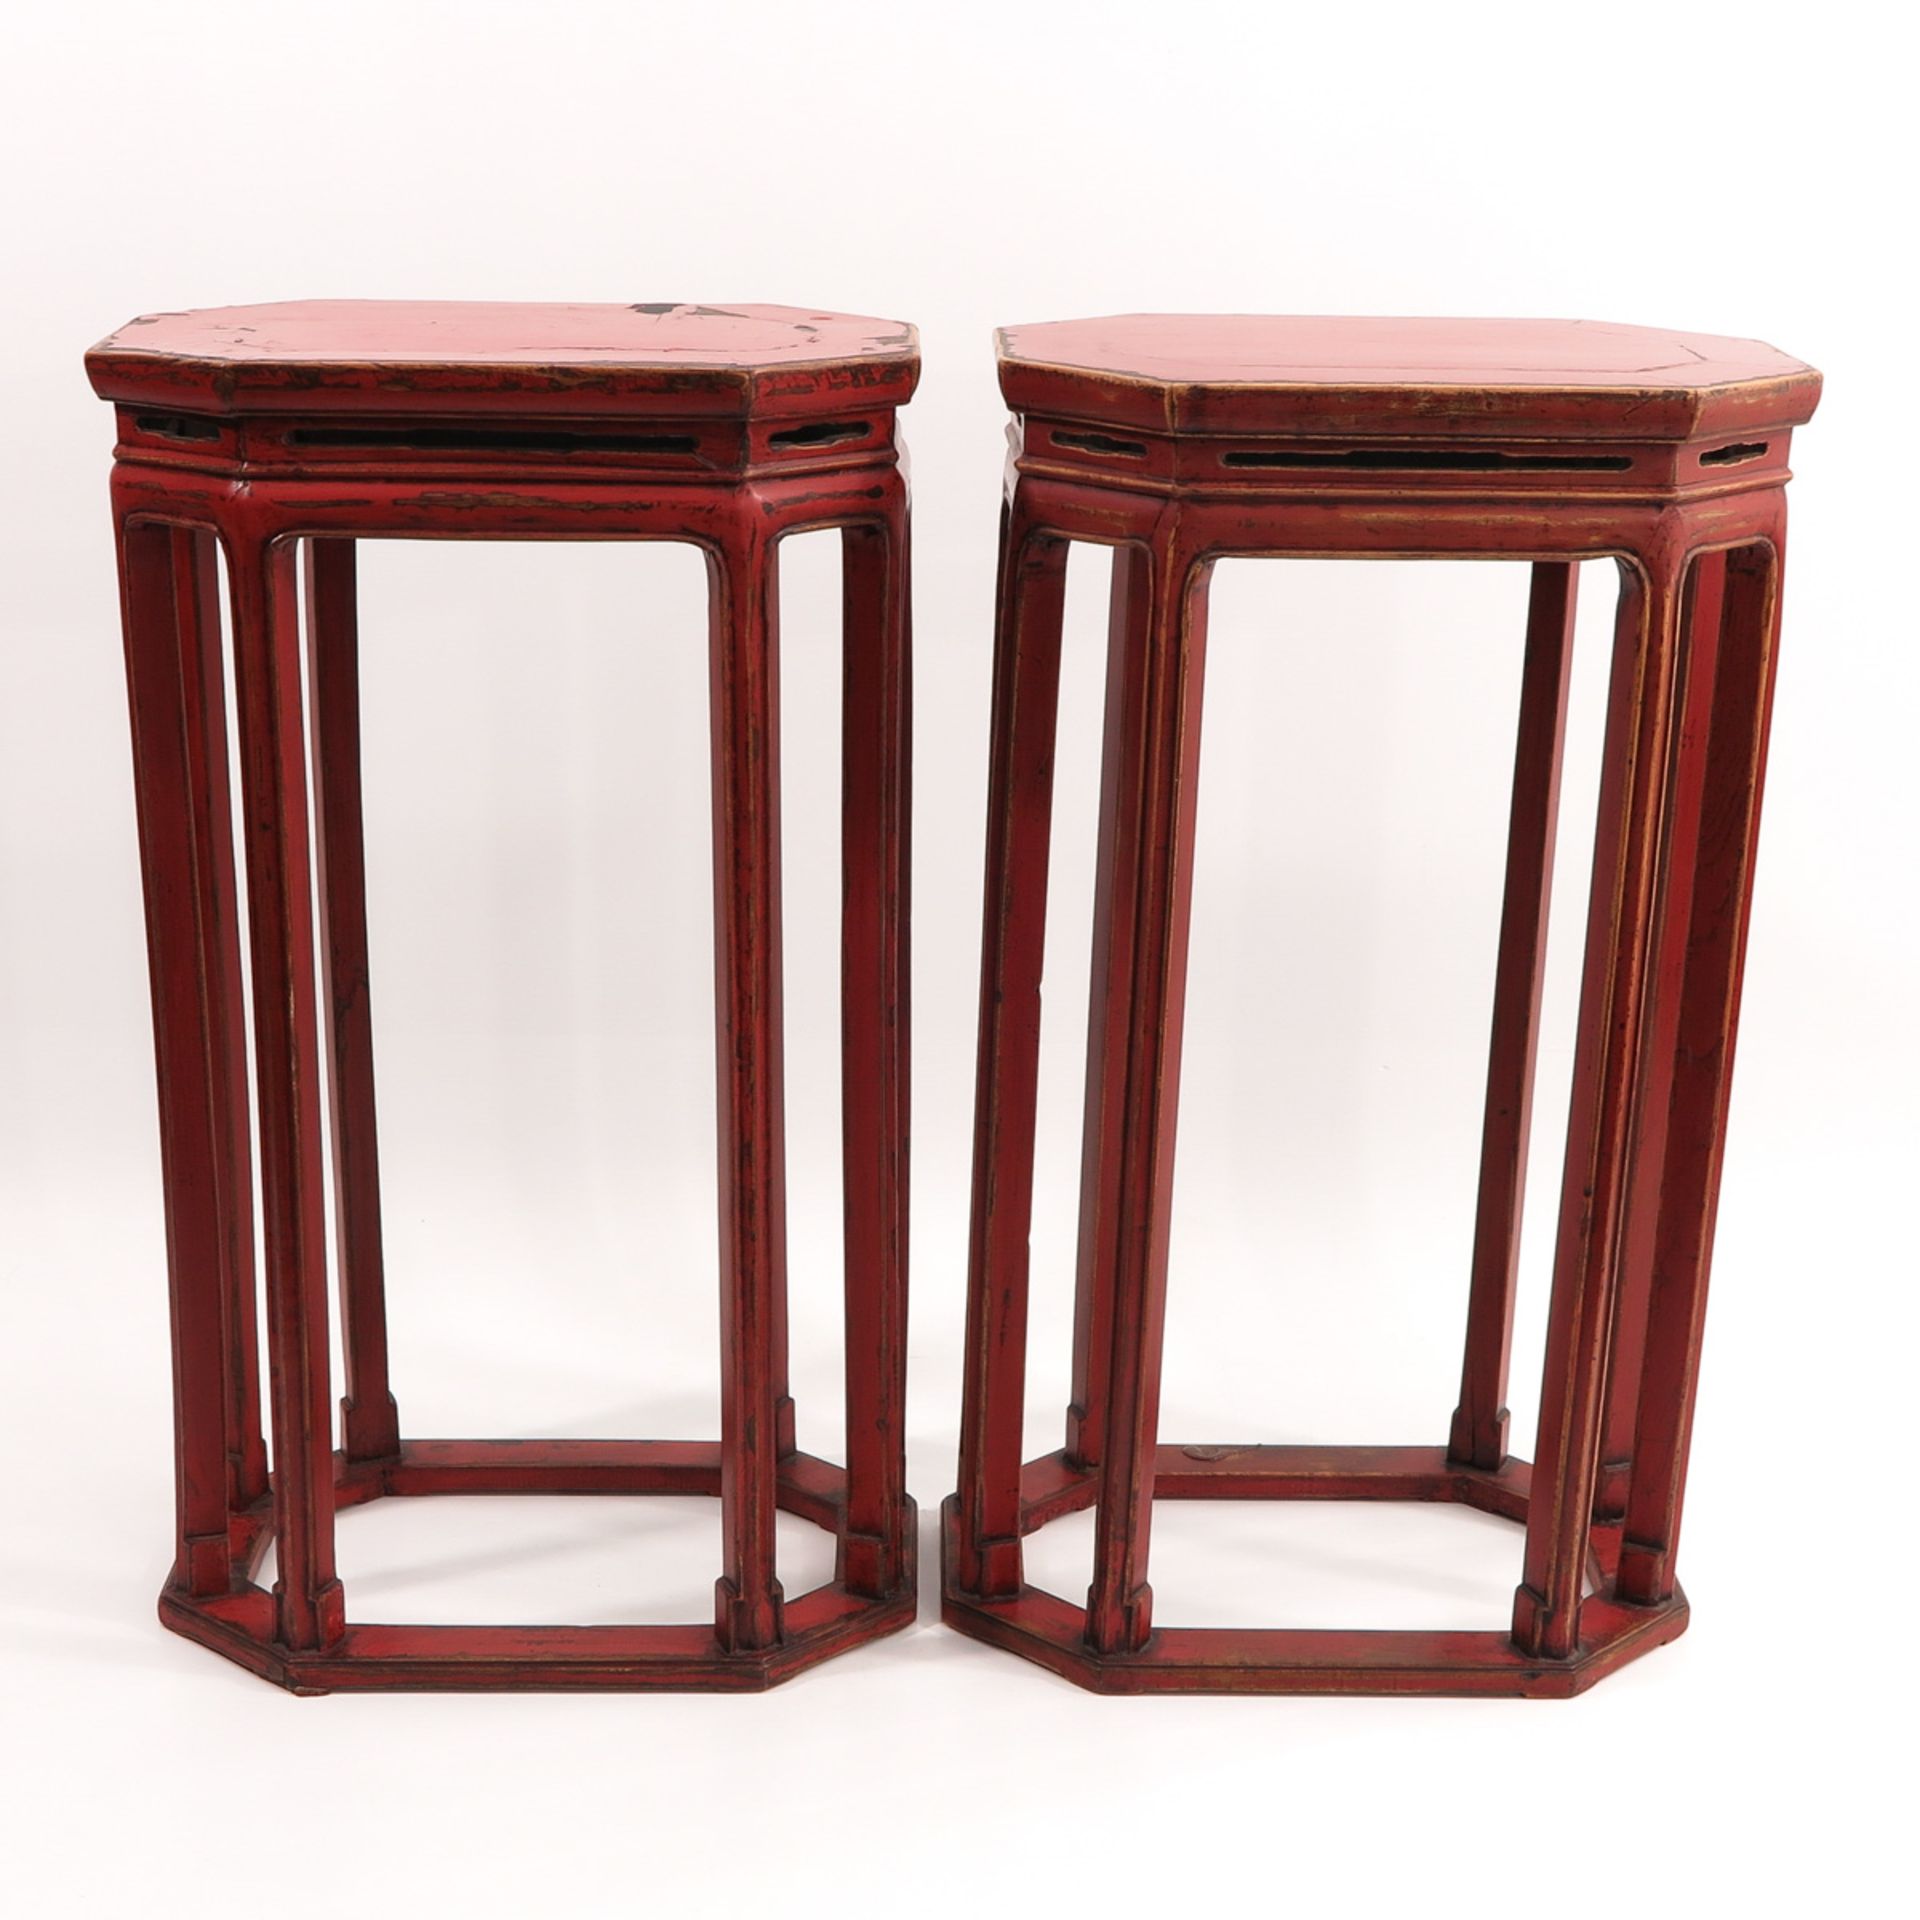 A Pair of Chinese Lacquer Side Tables